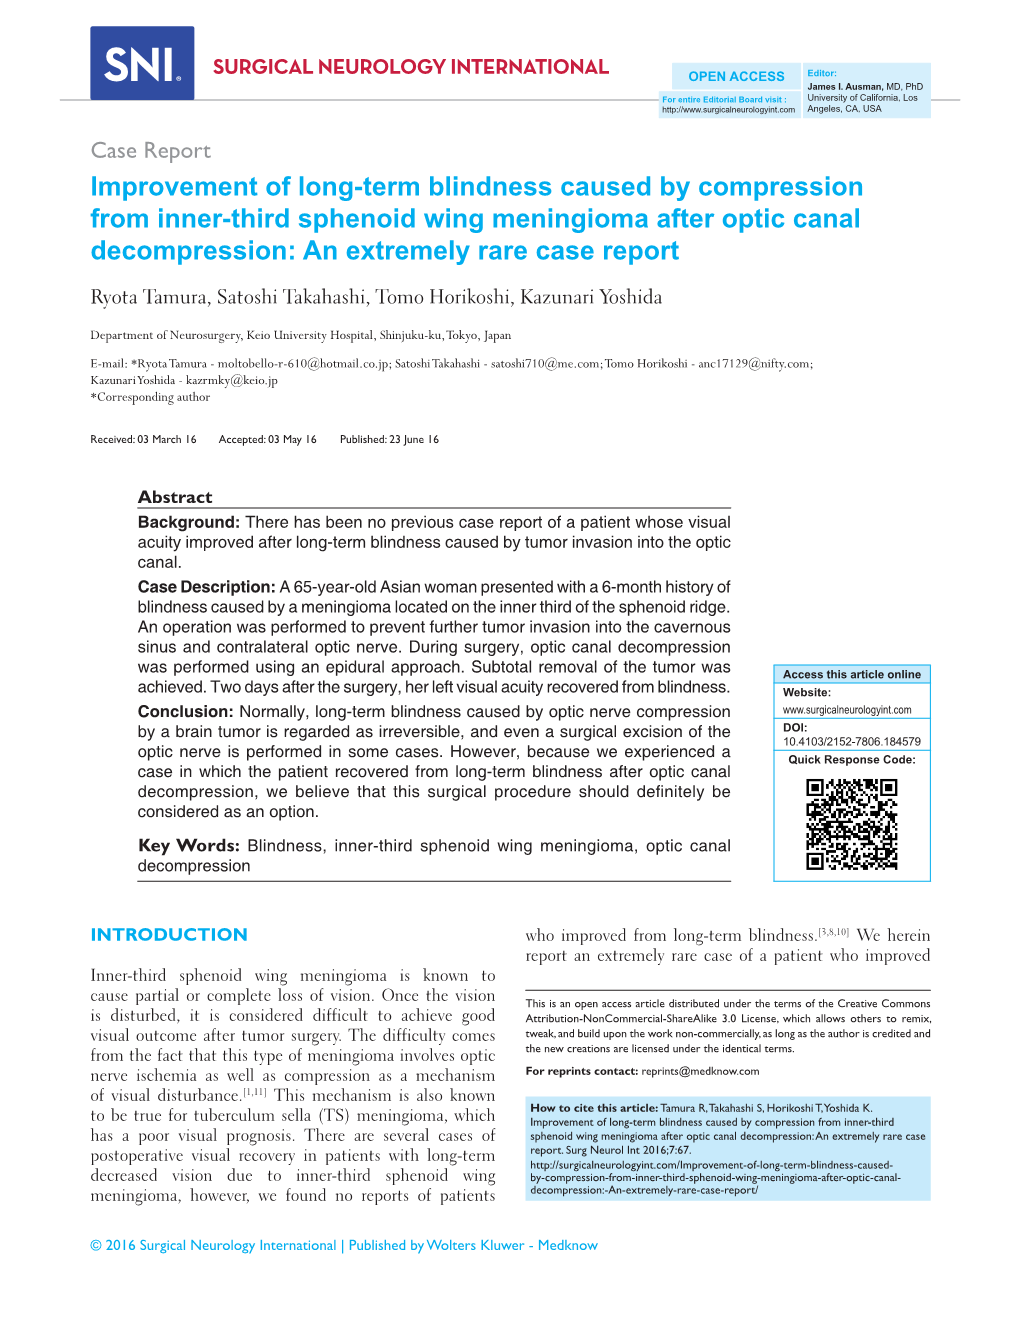 Improvement of Long‑Term Blindness Caused by Compression from Inner